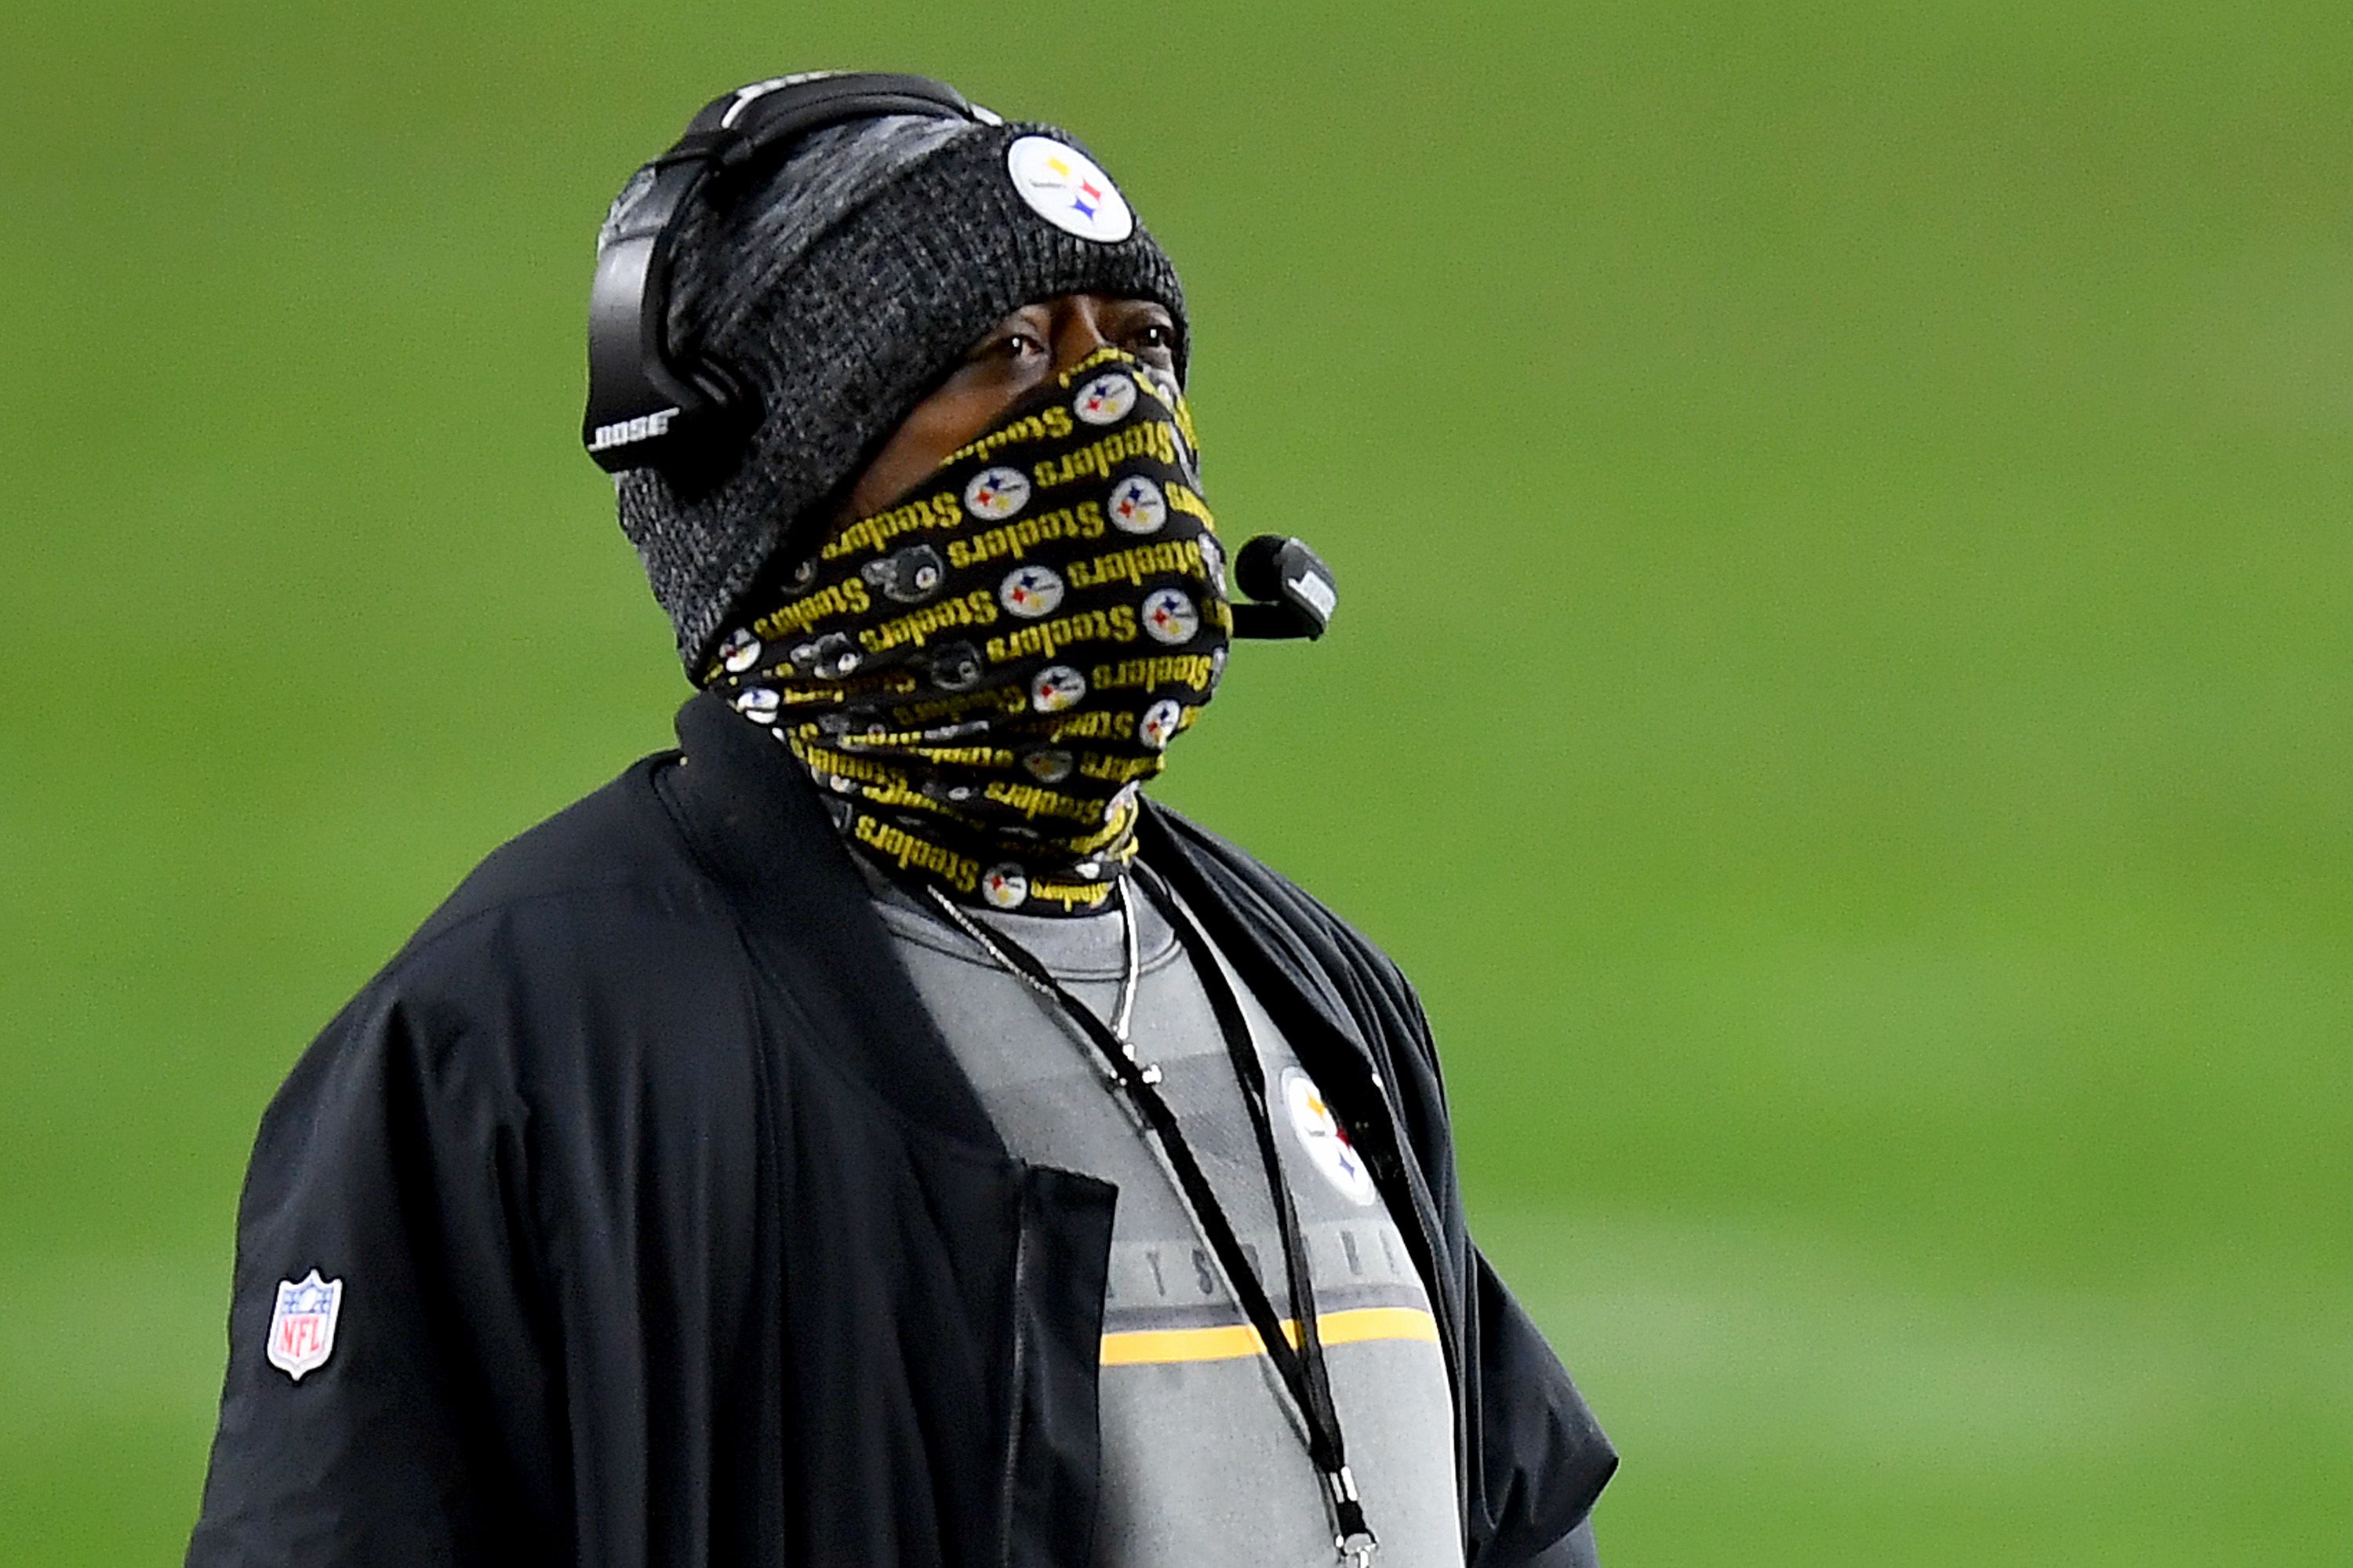 Mike Tomlin having an interview after the game